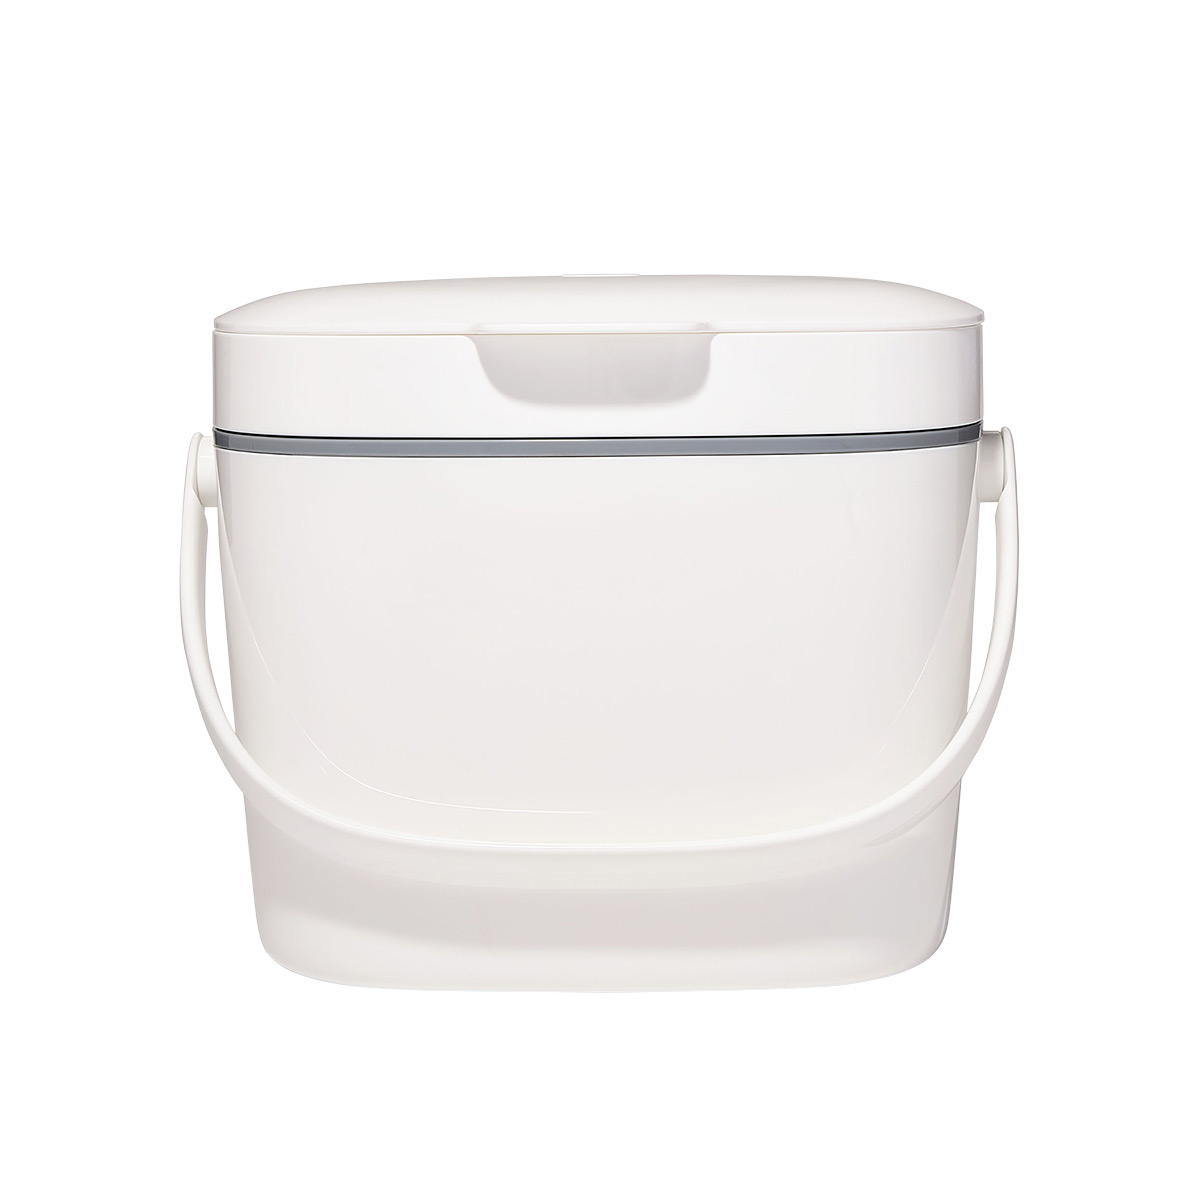 https://www.containerstore.com/catalogimages/479042/10092713-oxo-good-grips-compost-bin-.jpg